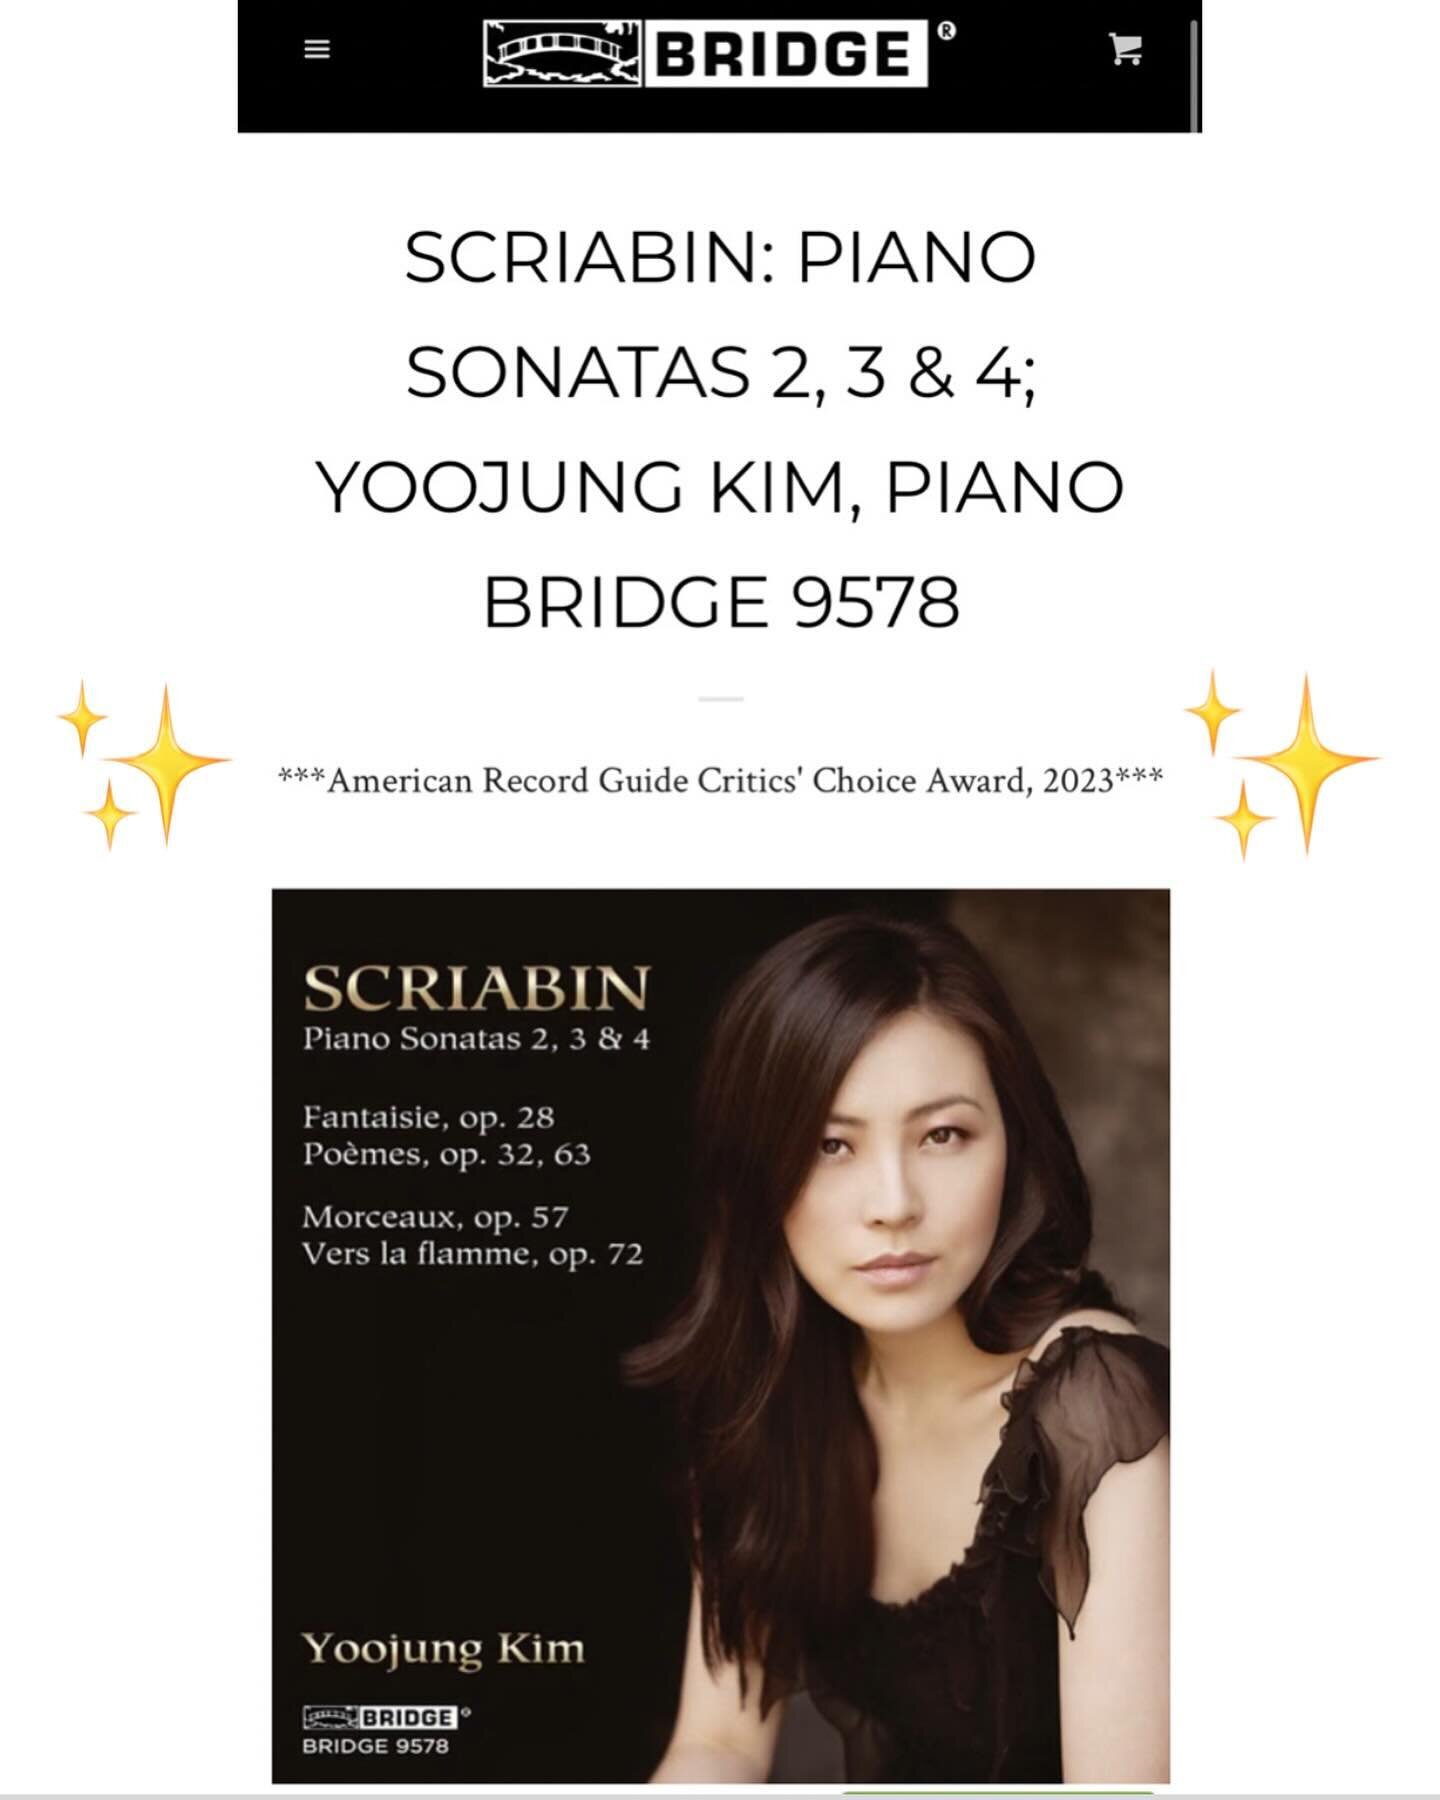 Exciting news!🌟 Thrilled to share that my Scriabin disc just received the Critics&rsquo; Choice Award from the American Record Guide for 2023. Feeling beyond grateful! 🎶🎹💿✨

.
.
.
#criticschoice #scriabin #piano #musicaward #gratitude #pianist  #